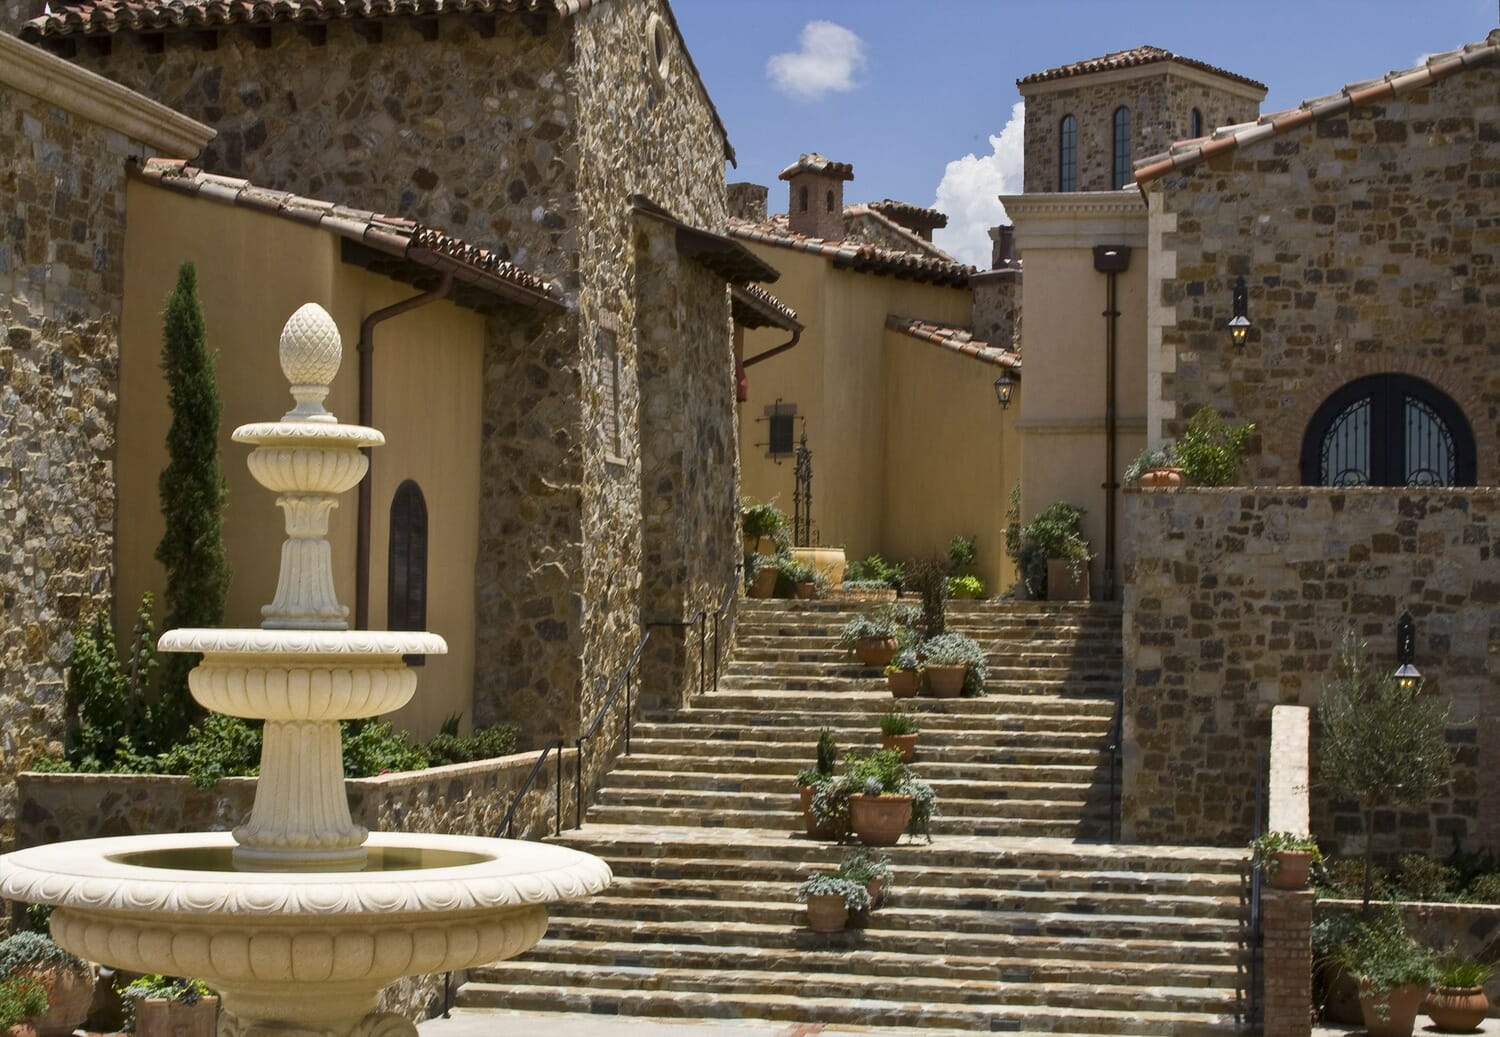 A fountain in front of a stone house.